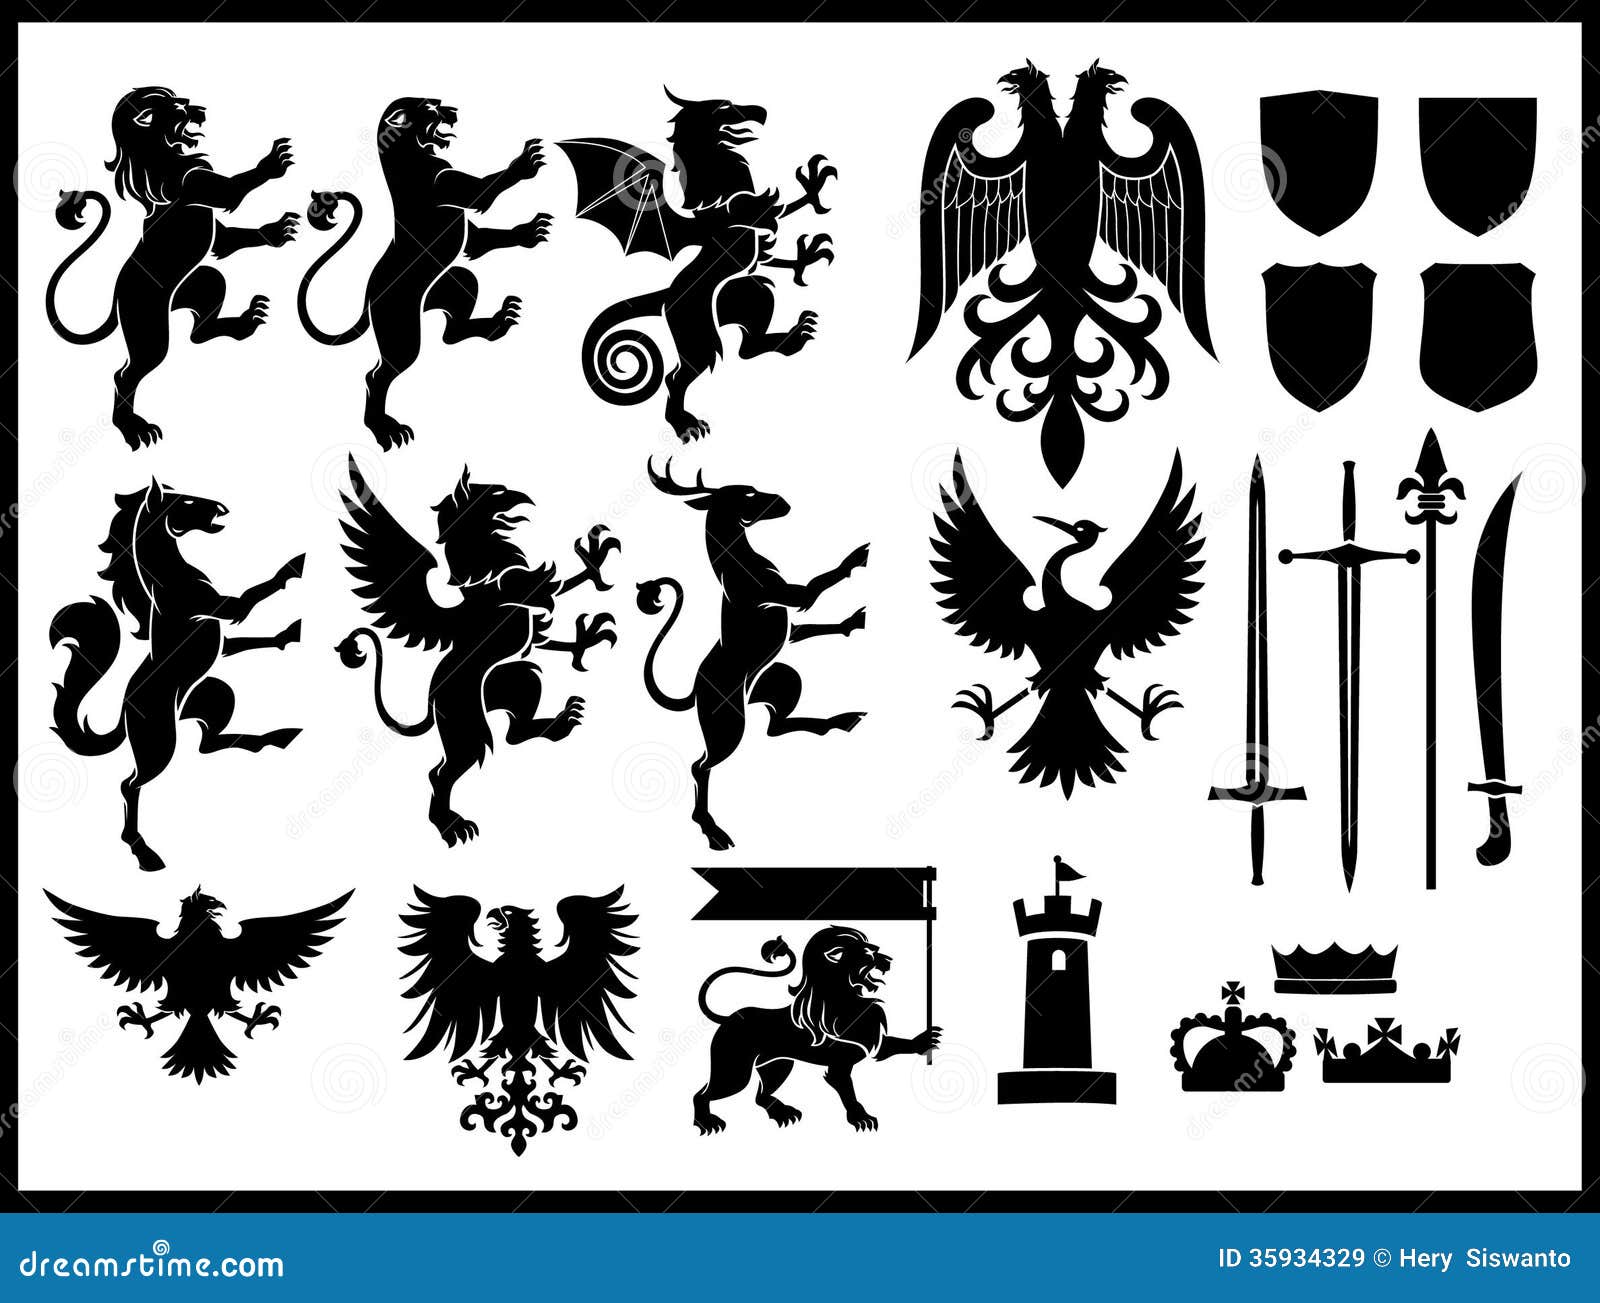 heraldry clipart download free - photo #36